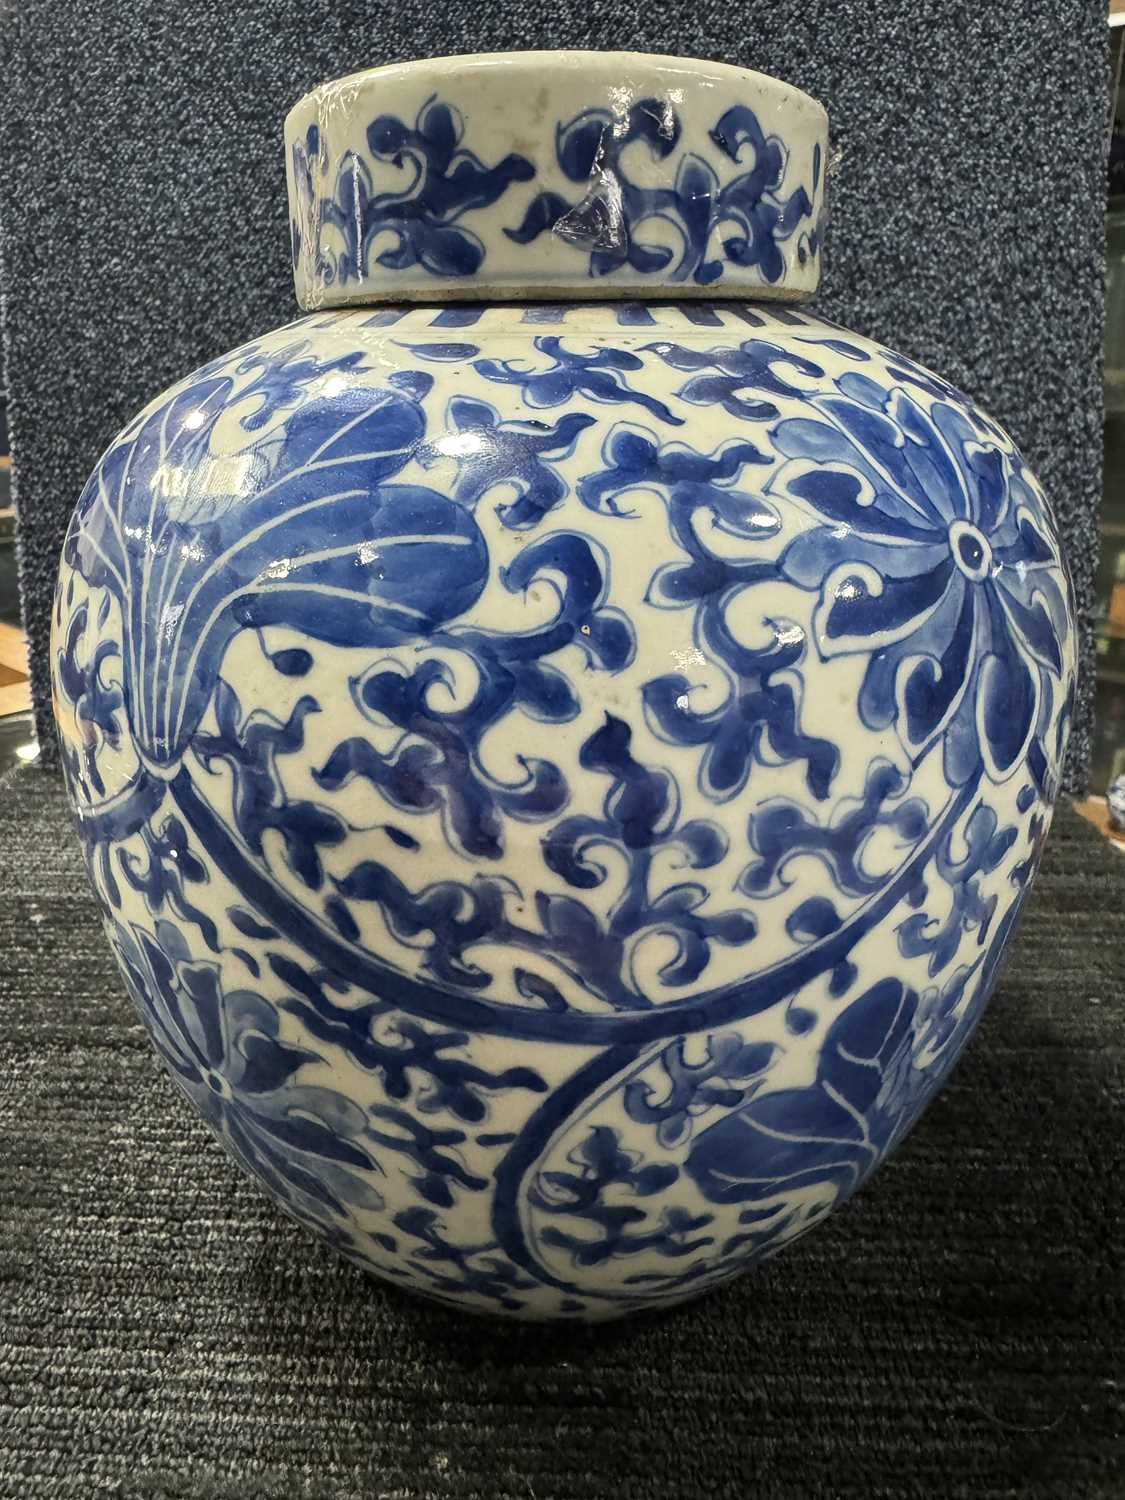 LATE 19TH/EARLY 20TH CENTURY CHINESE BLUE AND WHITE LIDDED GINGER JAR, GUANGXU PERIOD (1875-1908) - Bild 4 aus 9